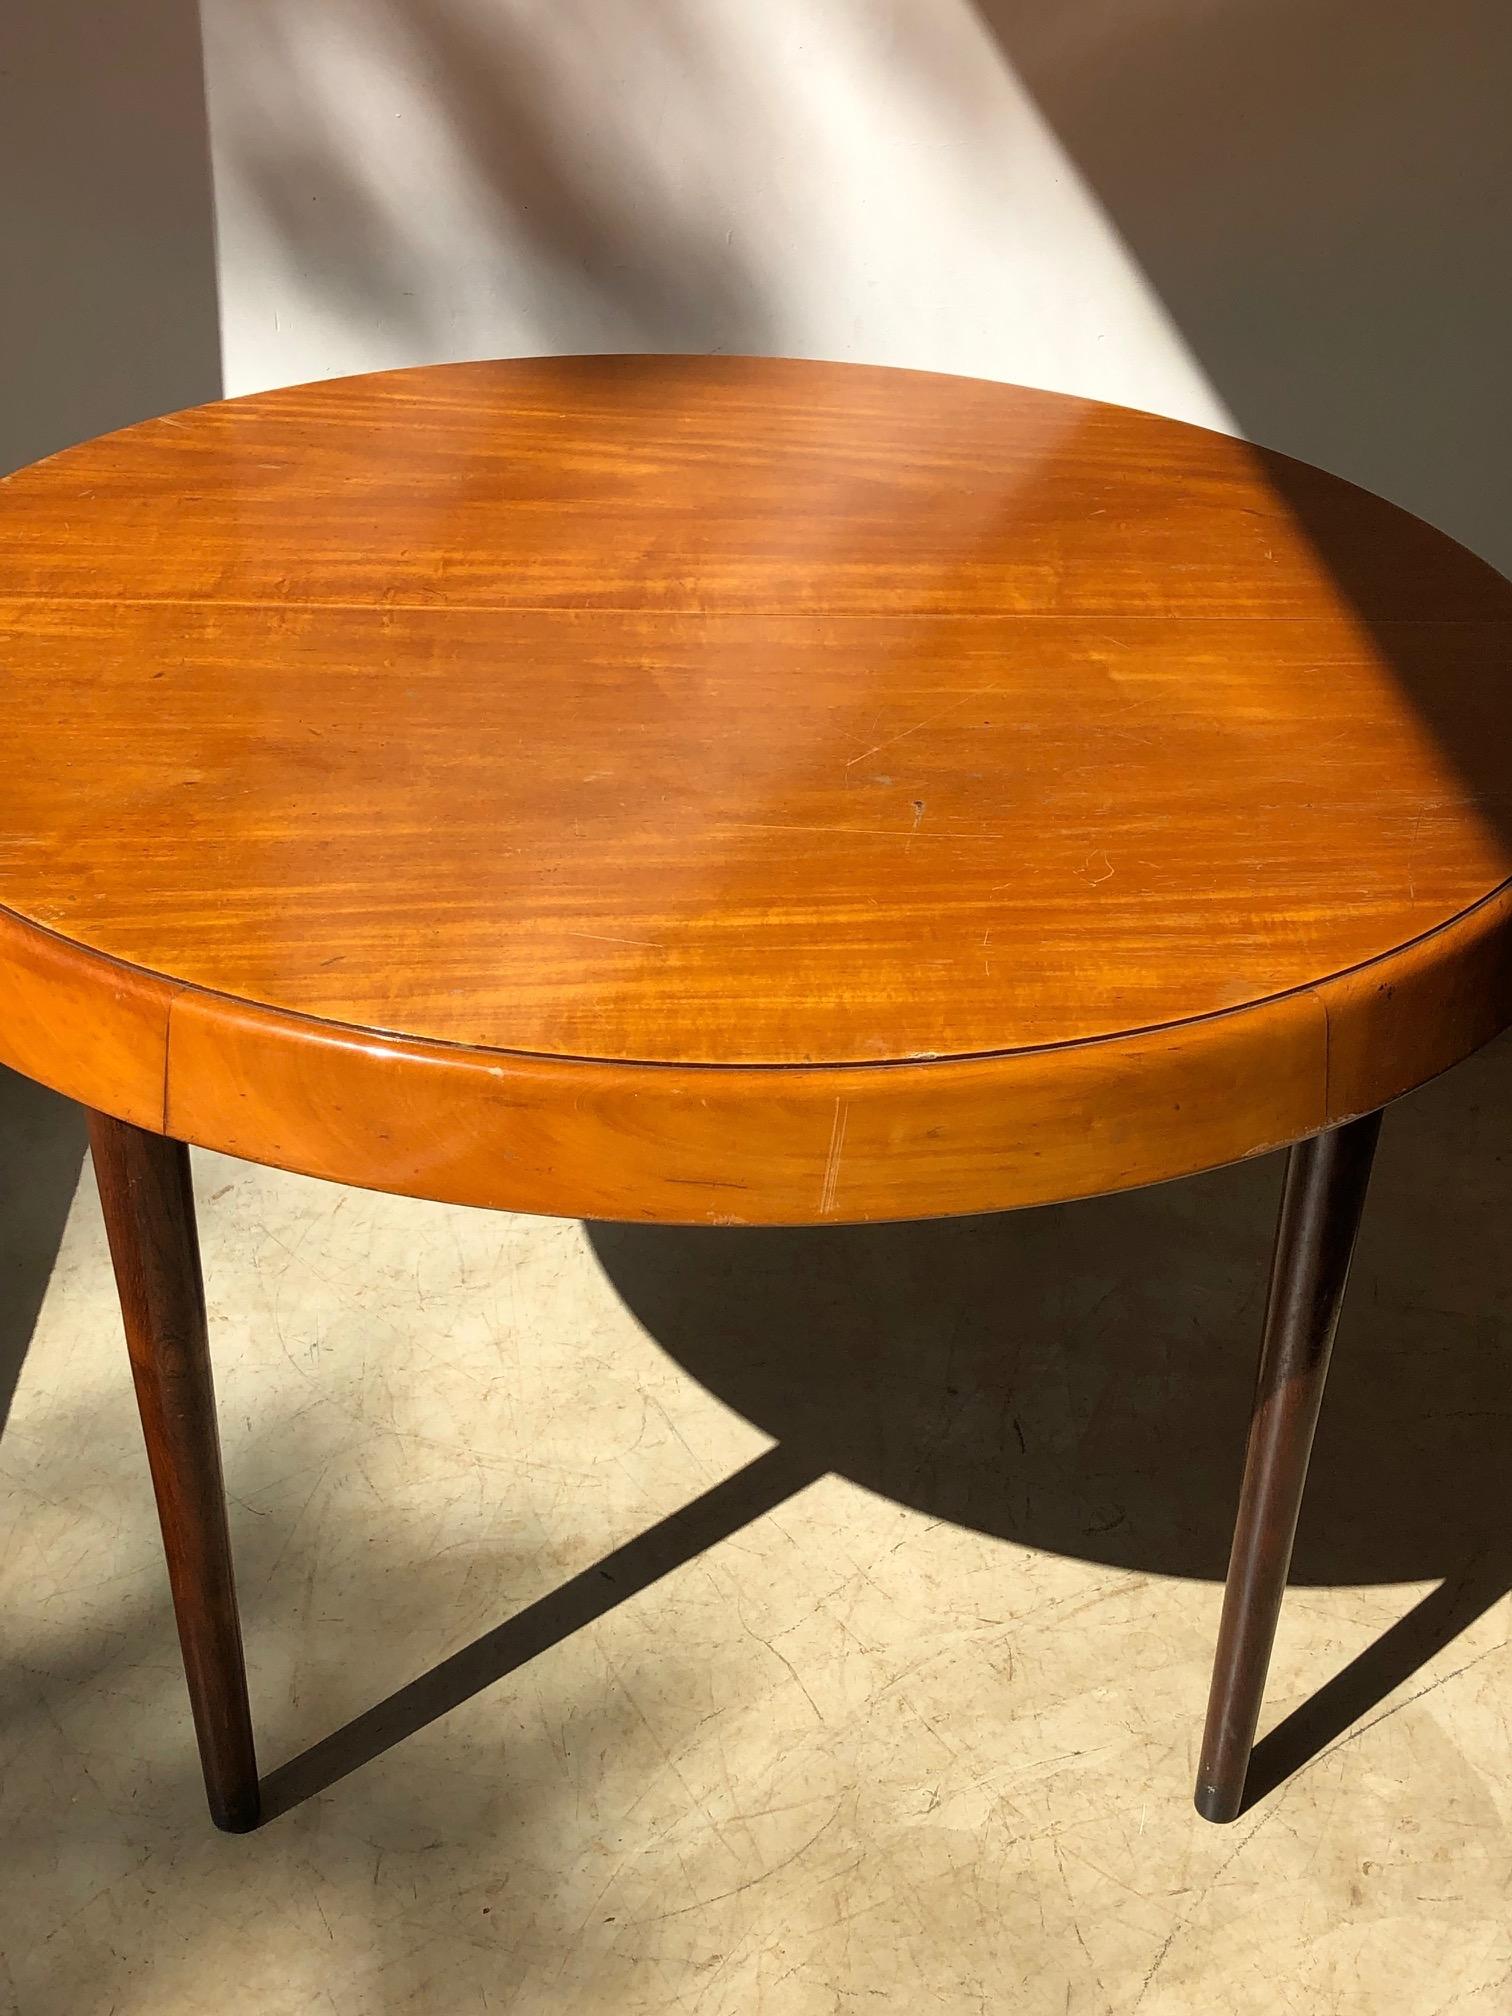 Martin Eisler for Forma. Brazilian modernist extendible round dining table. Pau marfim wood top and solid wooden structure. This table reaches 1,60m when its open. It features the manufacture Forma S.A stamp.